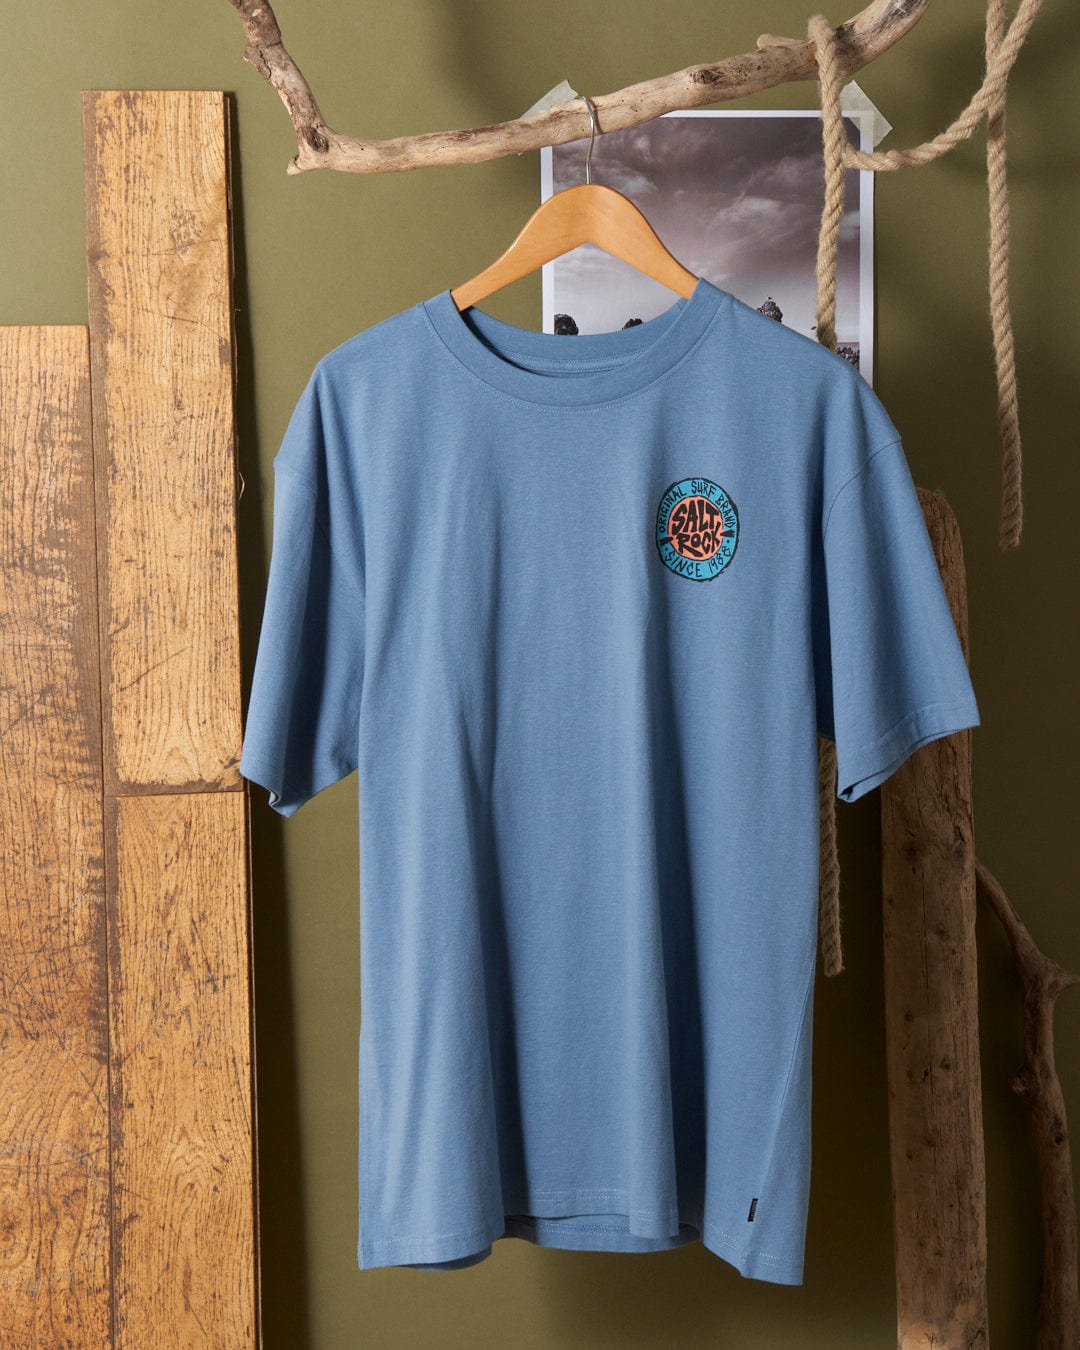 Blue Saltrock SR Original Mens Short Sleeve T-Shirt with a logo on the chest, displayed on a hanger against a wooden and green background.